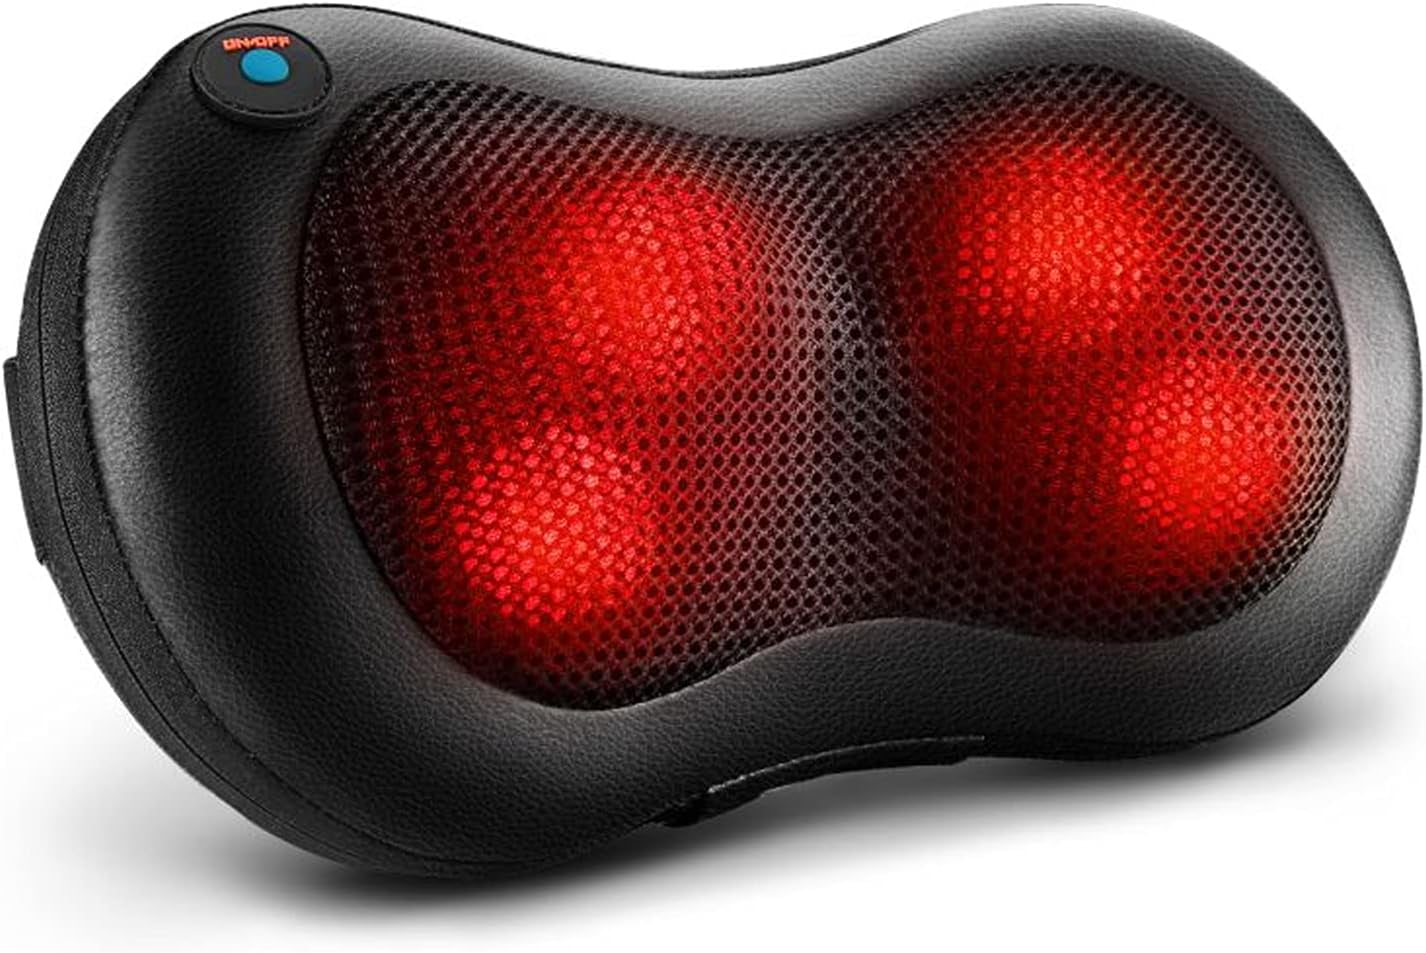 Naipo Shiatsu Neck Back Massager Pillow With Heat, Deep Tissue Kneading  Massager, Best Relaxation Gifts In Home Office Car - Massage Pillow -  AliExpress